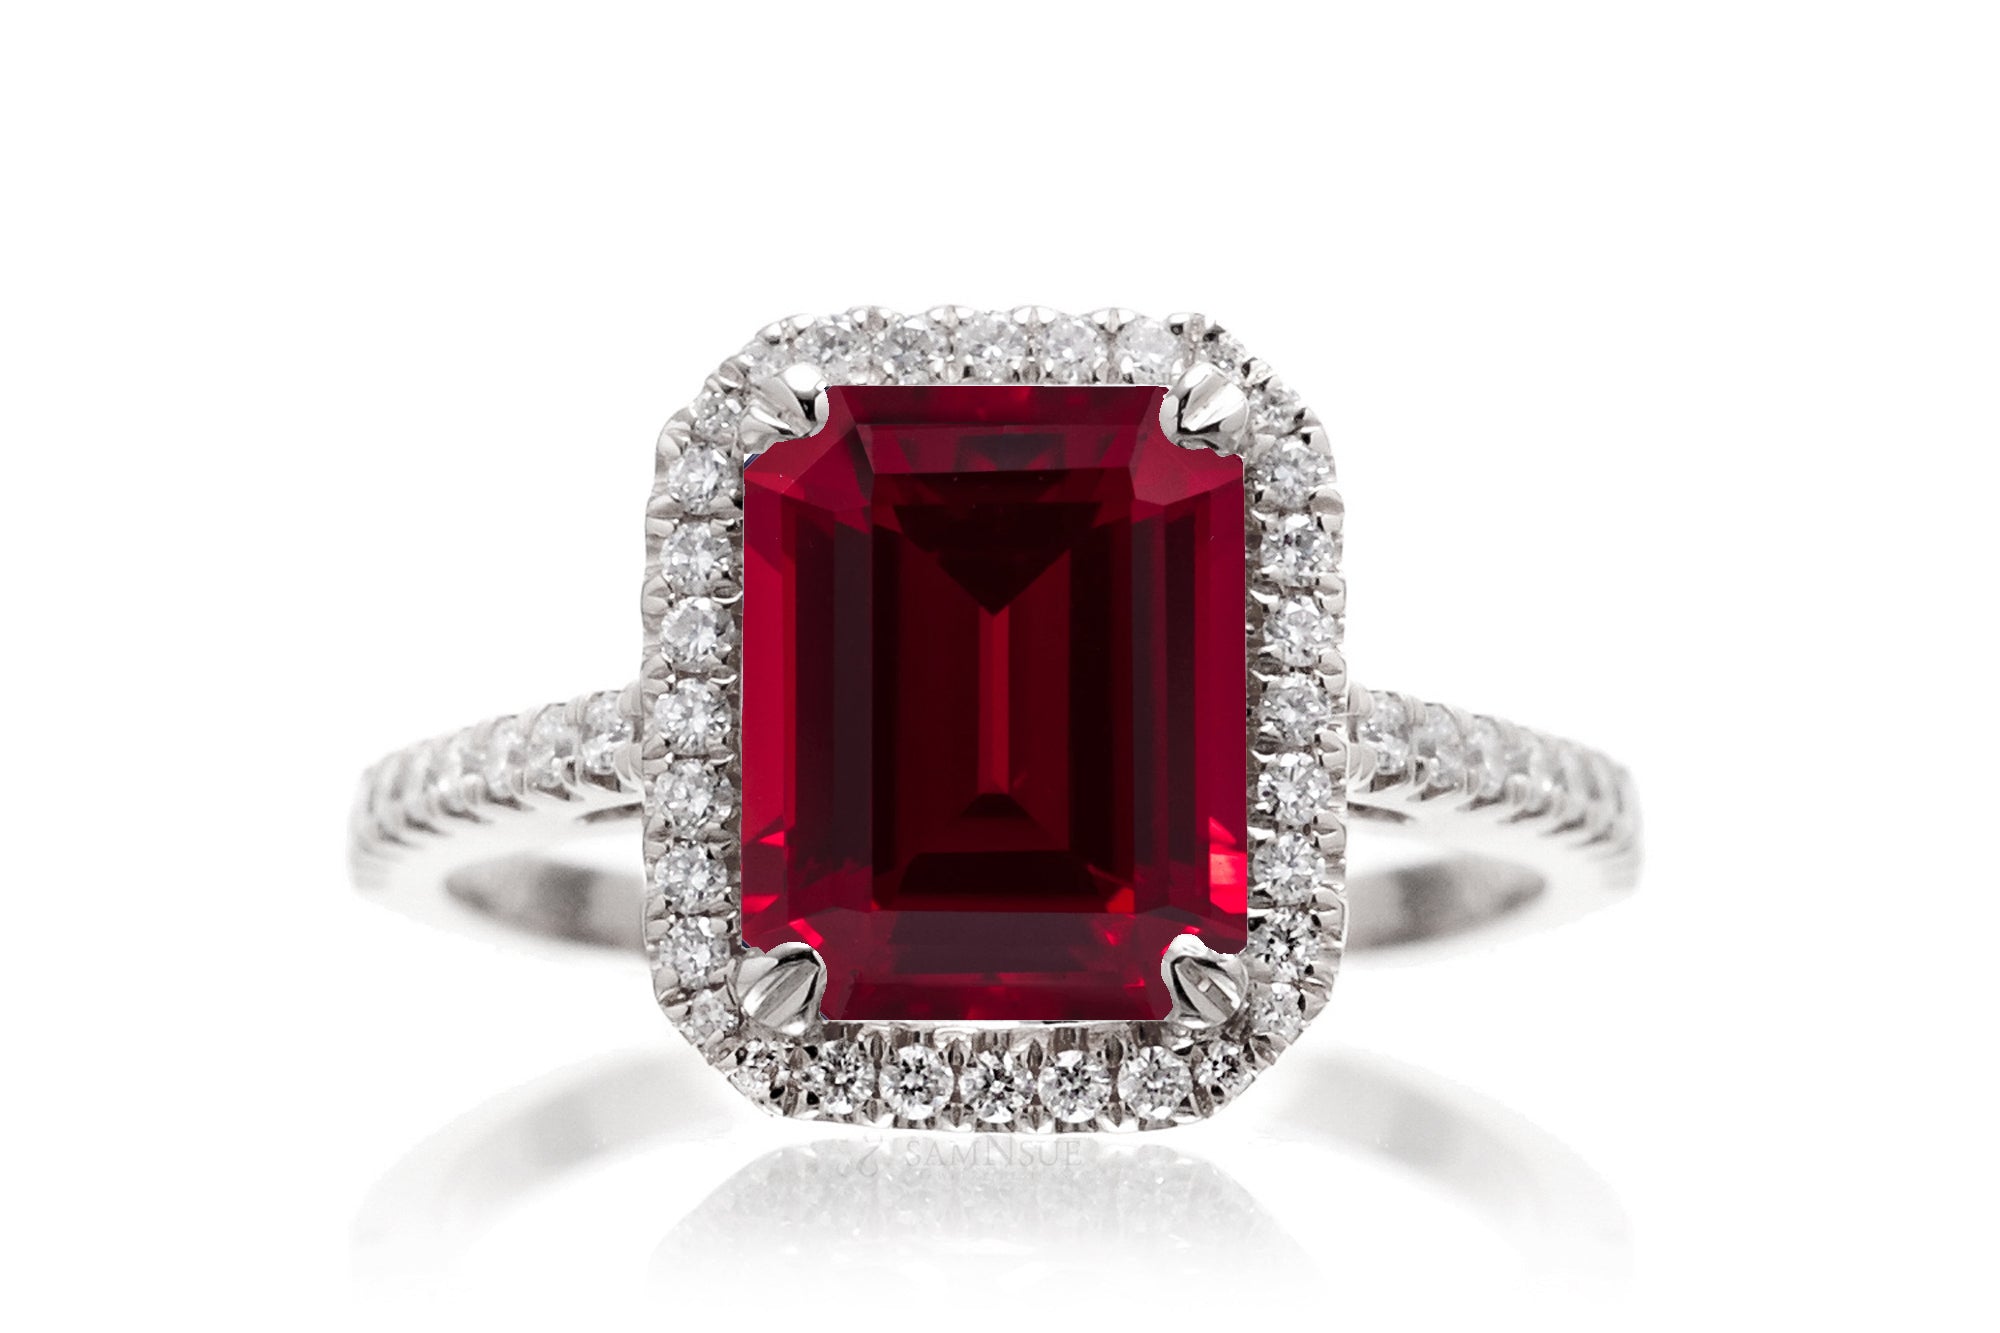 The Signature Emerald Cut Ruby Ring (Lab Grown)